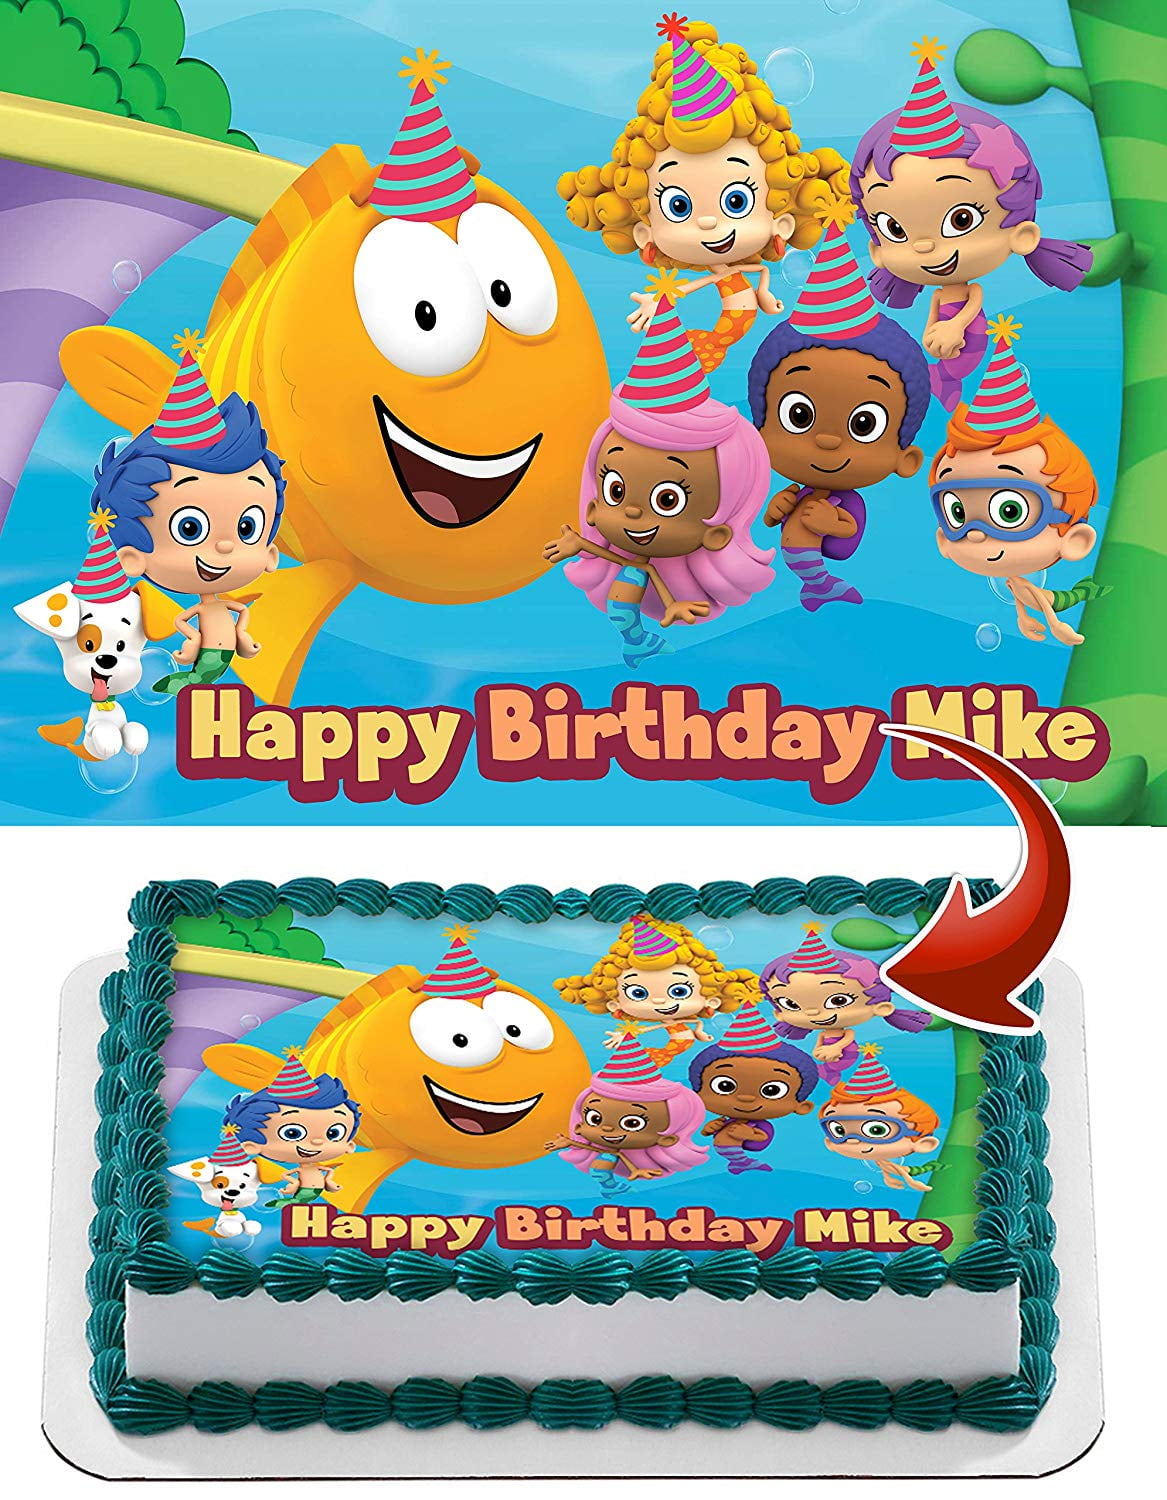 15 x 2" Bubble Guppies PRE CUT ICING Cupcake Topper Decorations